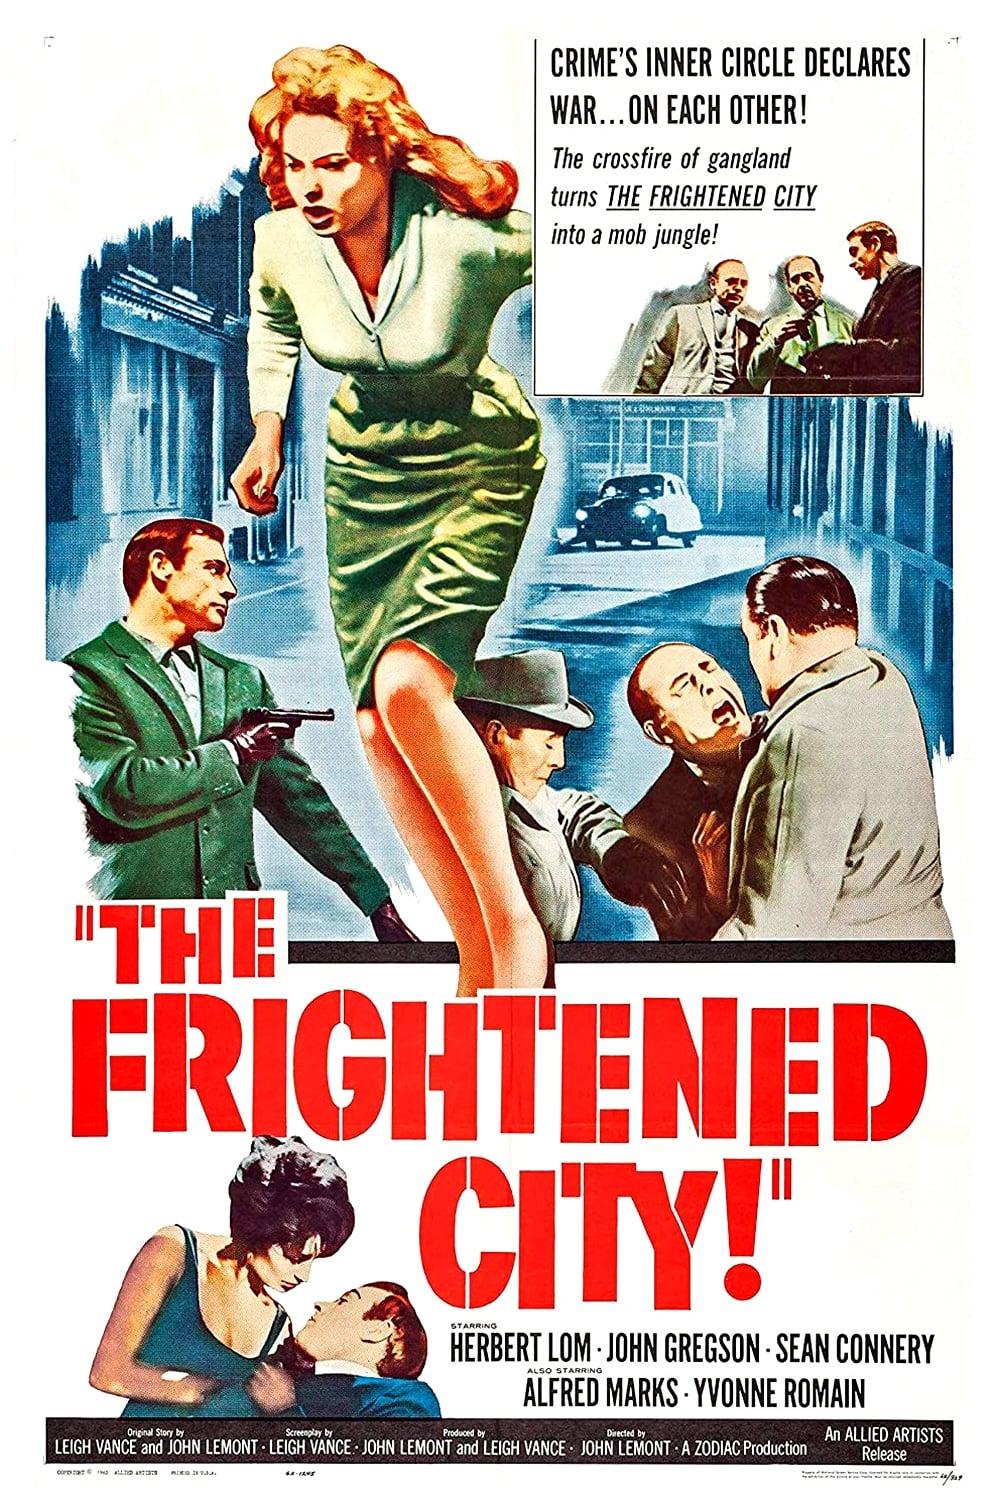 The Frightened City poster